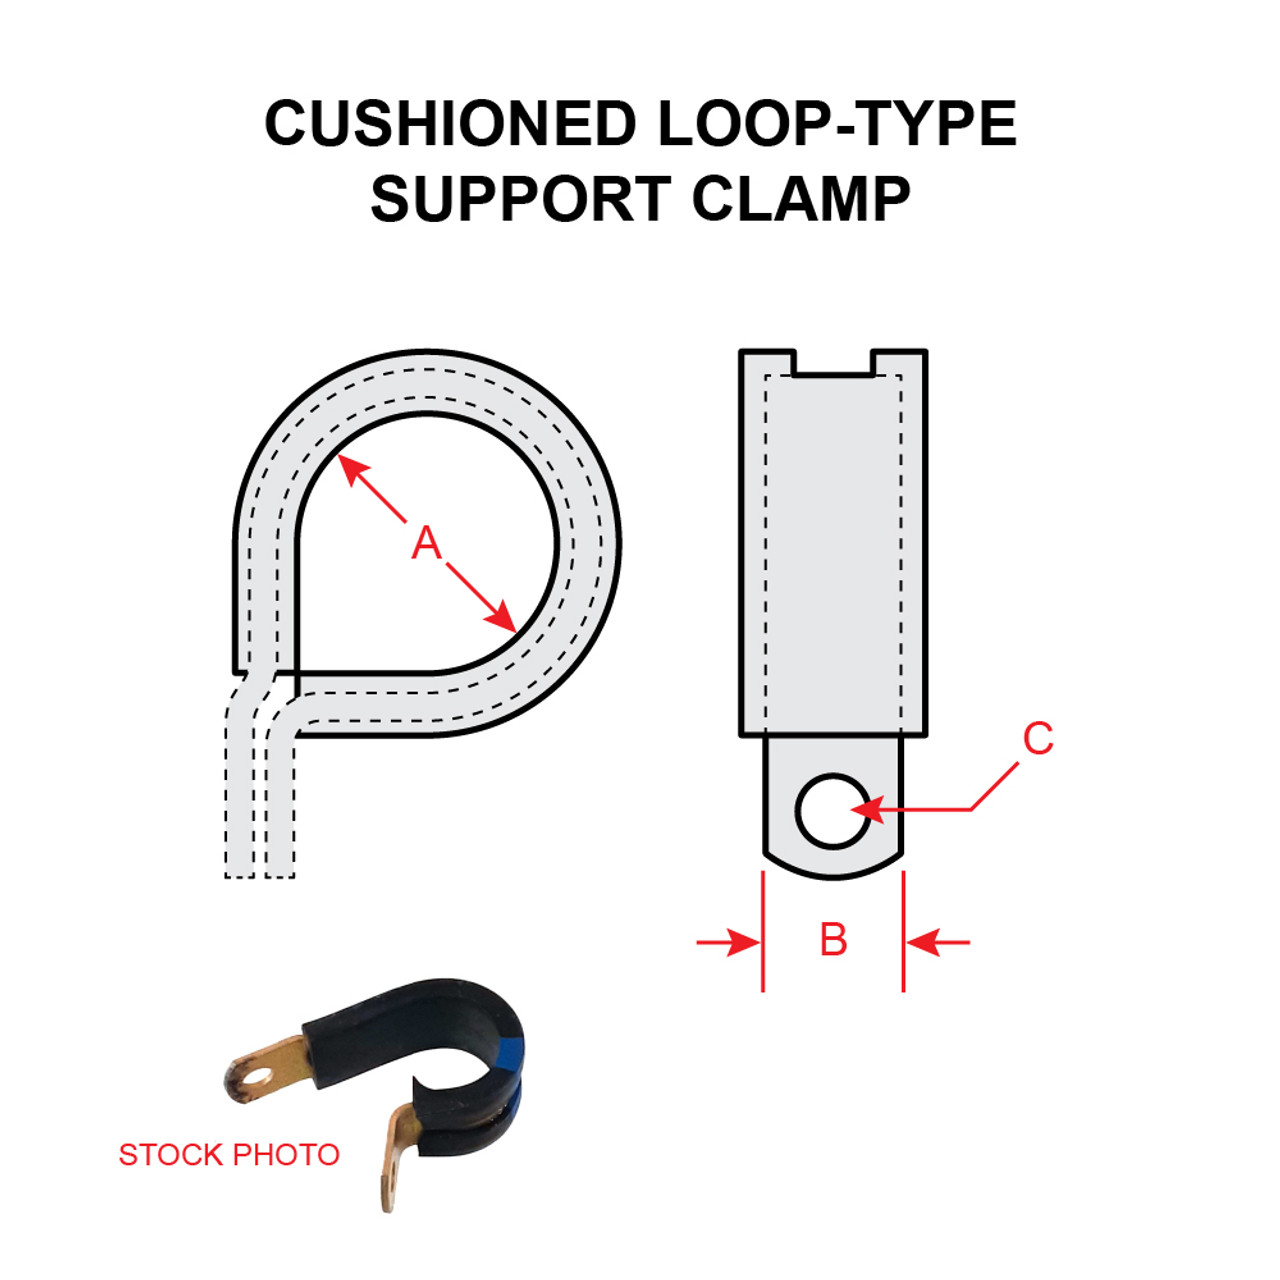 MS21919-DG6   LOOP-TYPE SUPPORT CLAMP - CUSHIONED